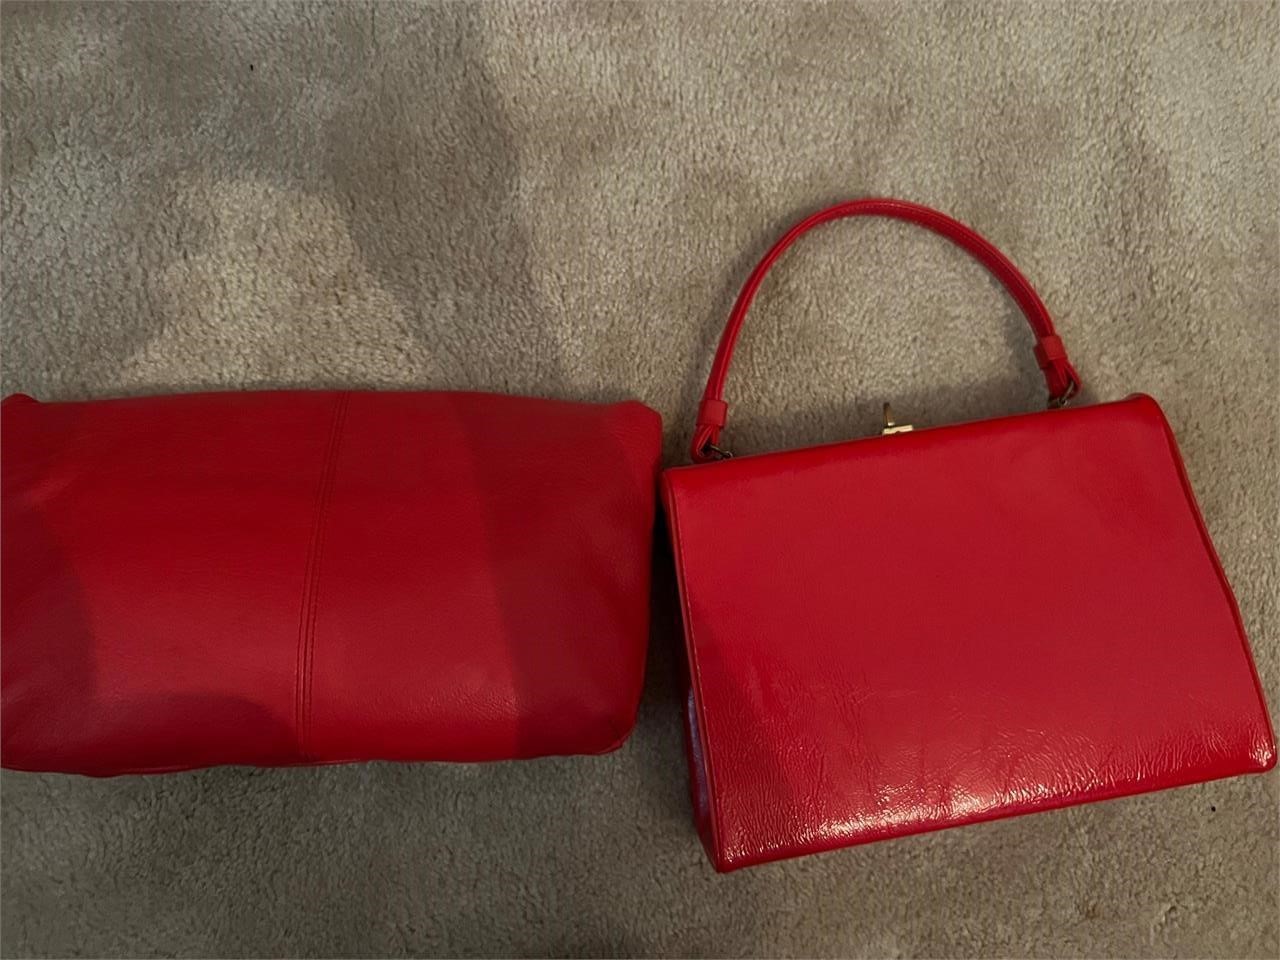 2 RED PURSES